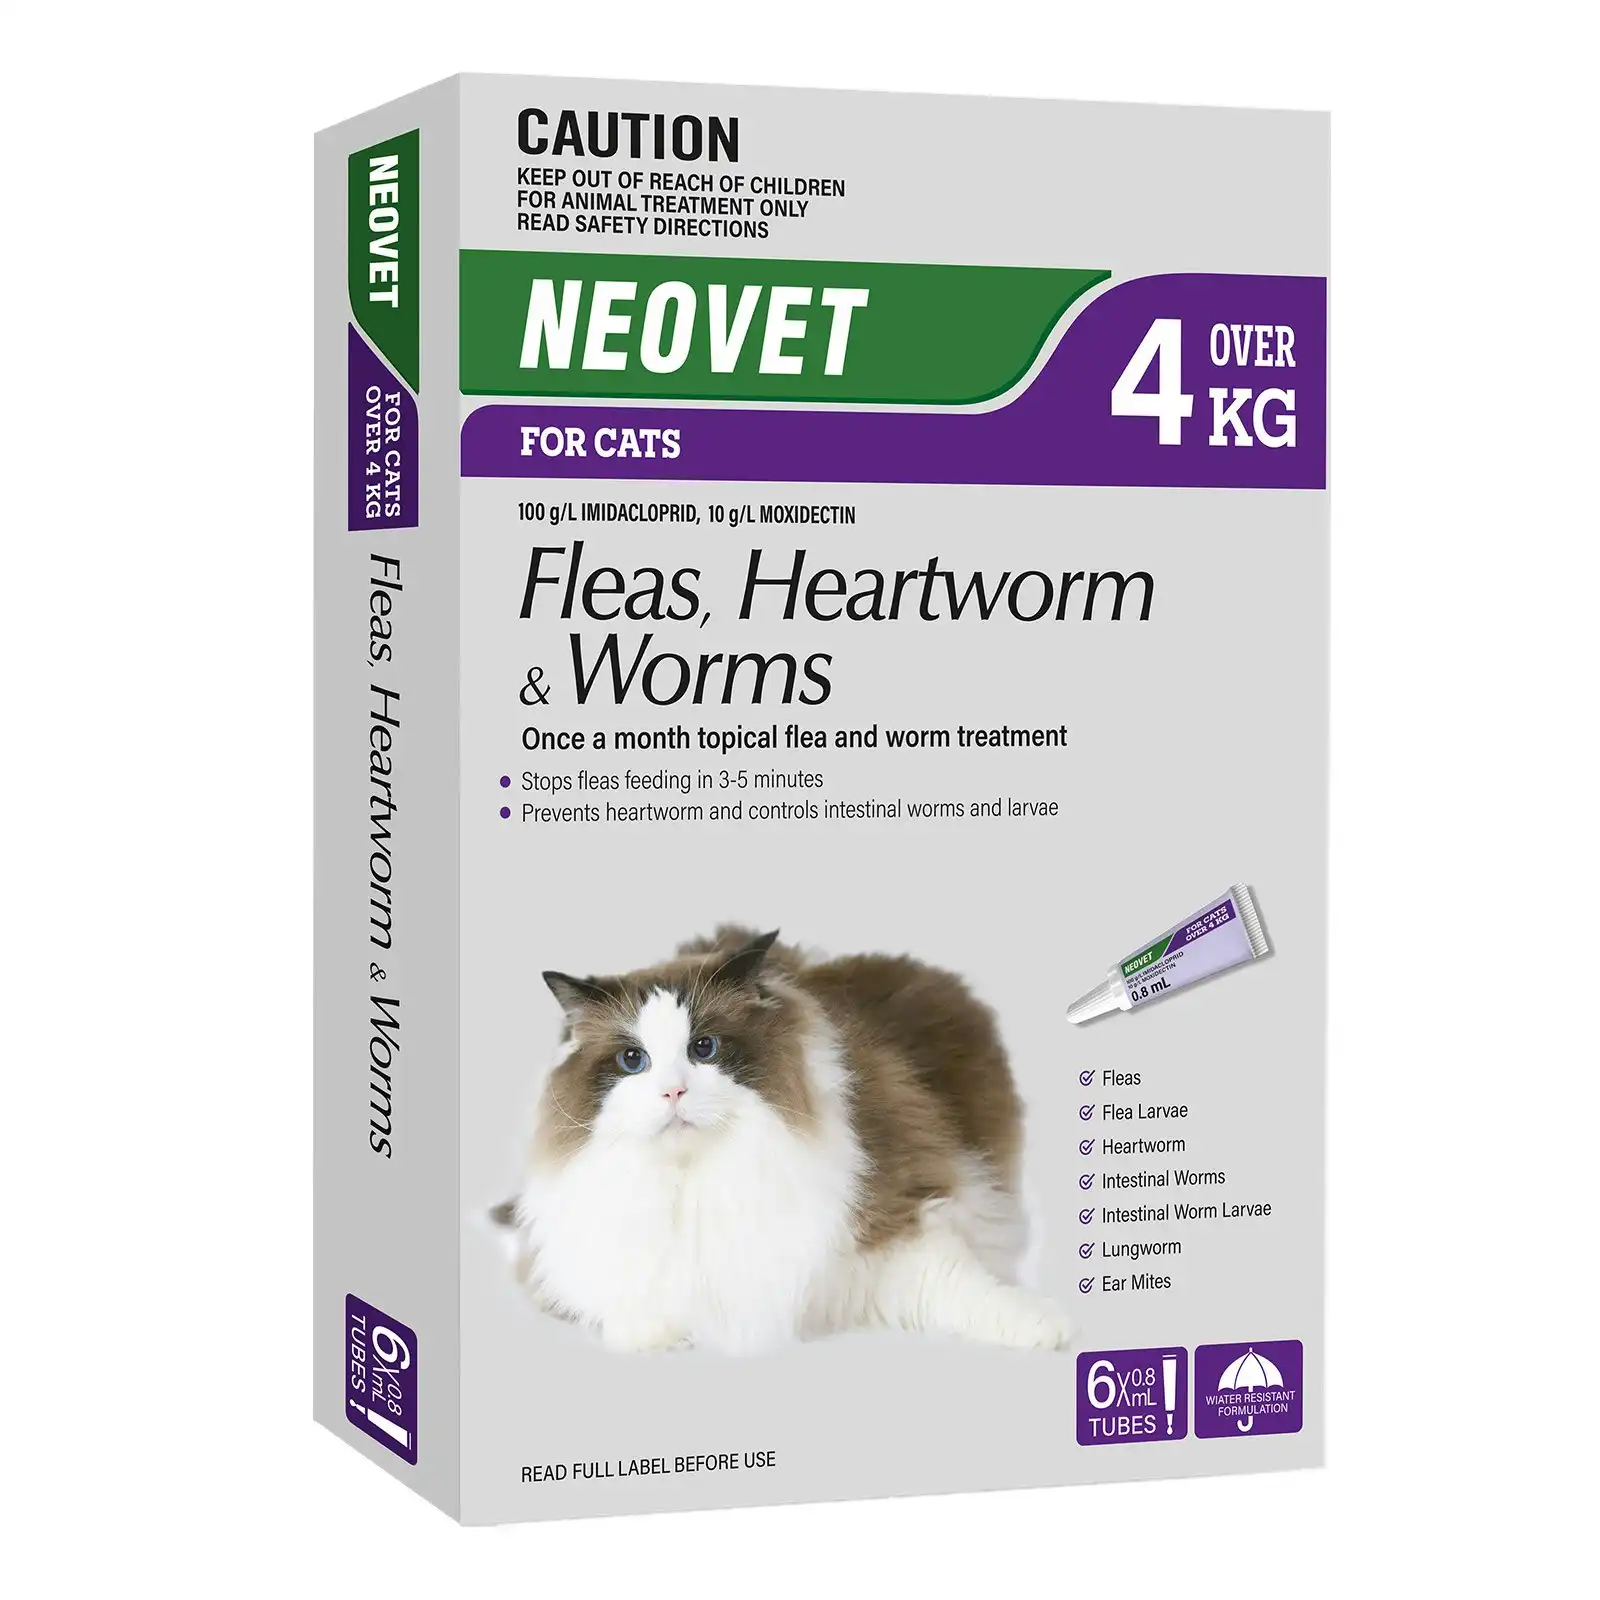 Neovet for Cats Over 4 Kg (PURPLE) 6 Pack